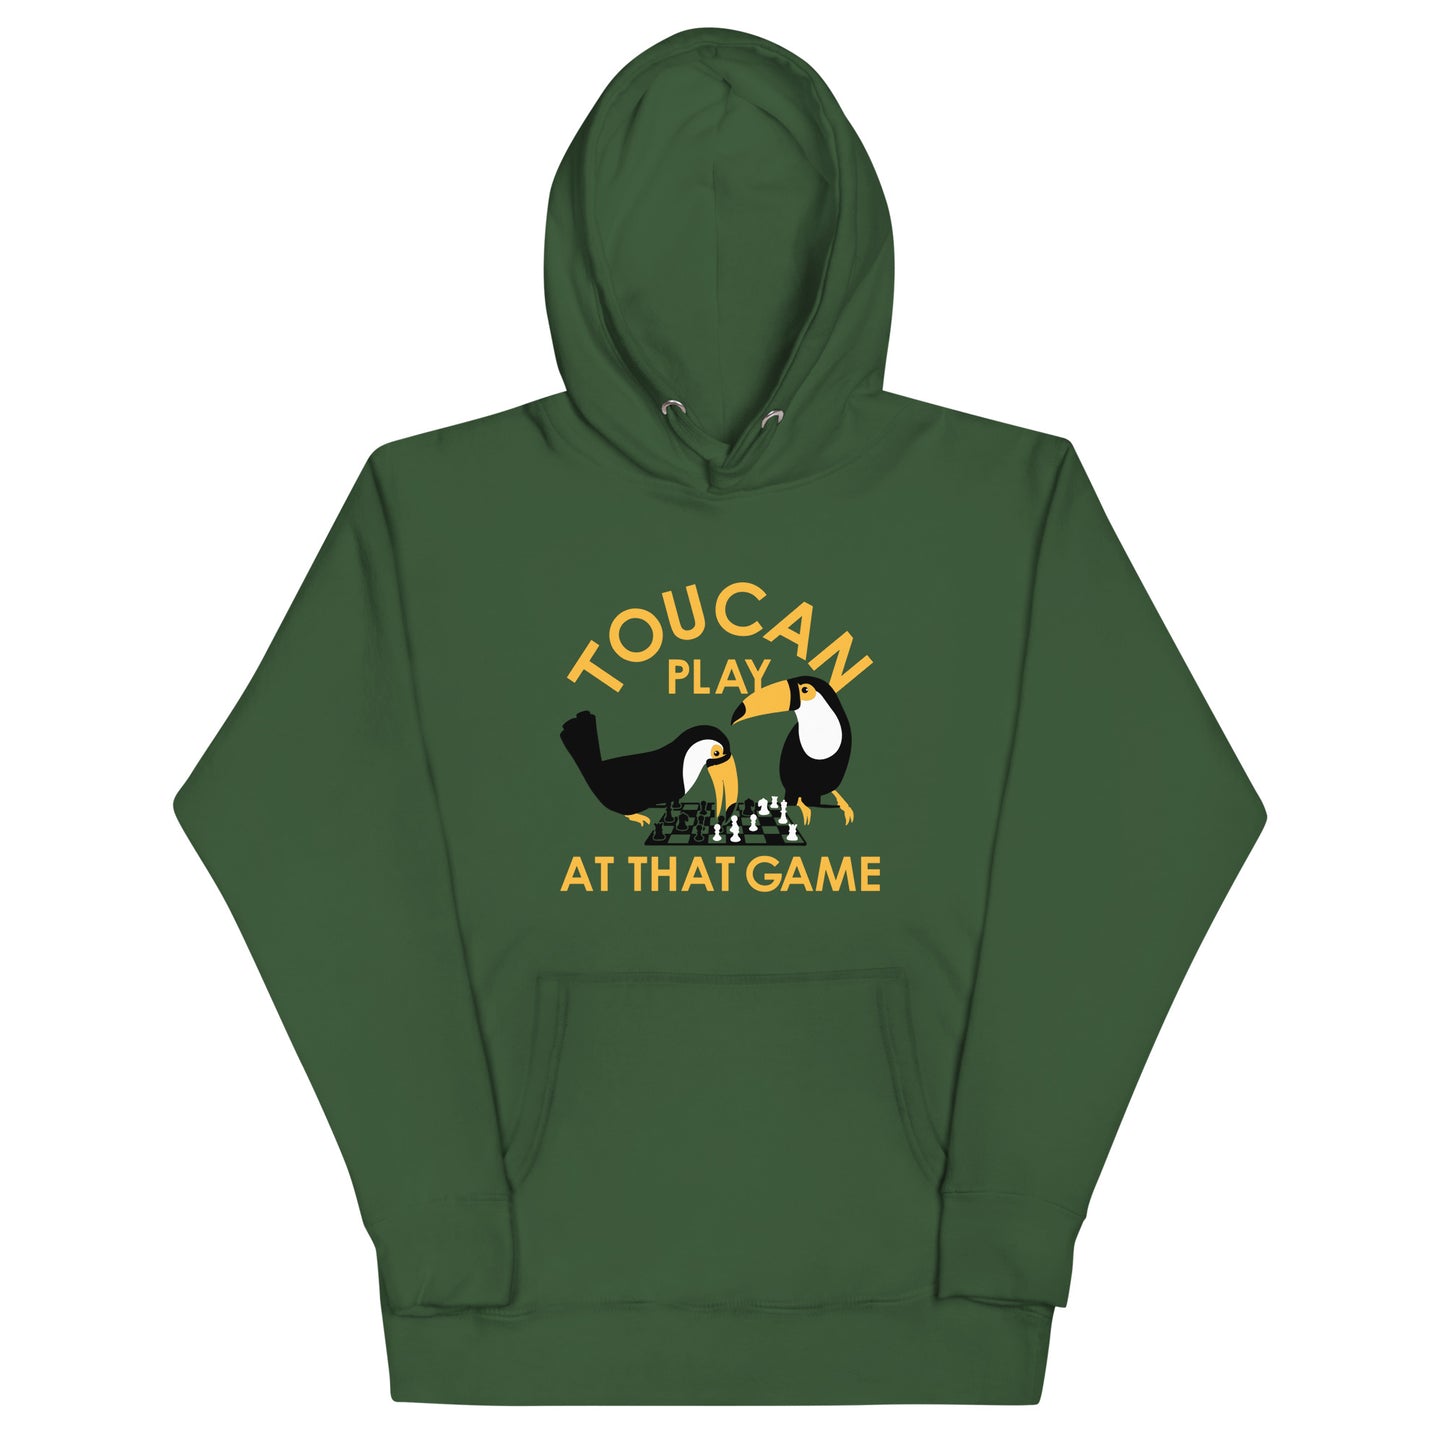 Toucan Play At That Game Unisex Hoodie